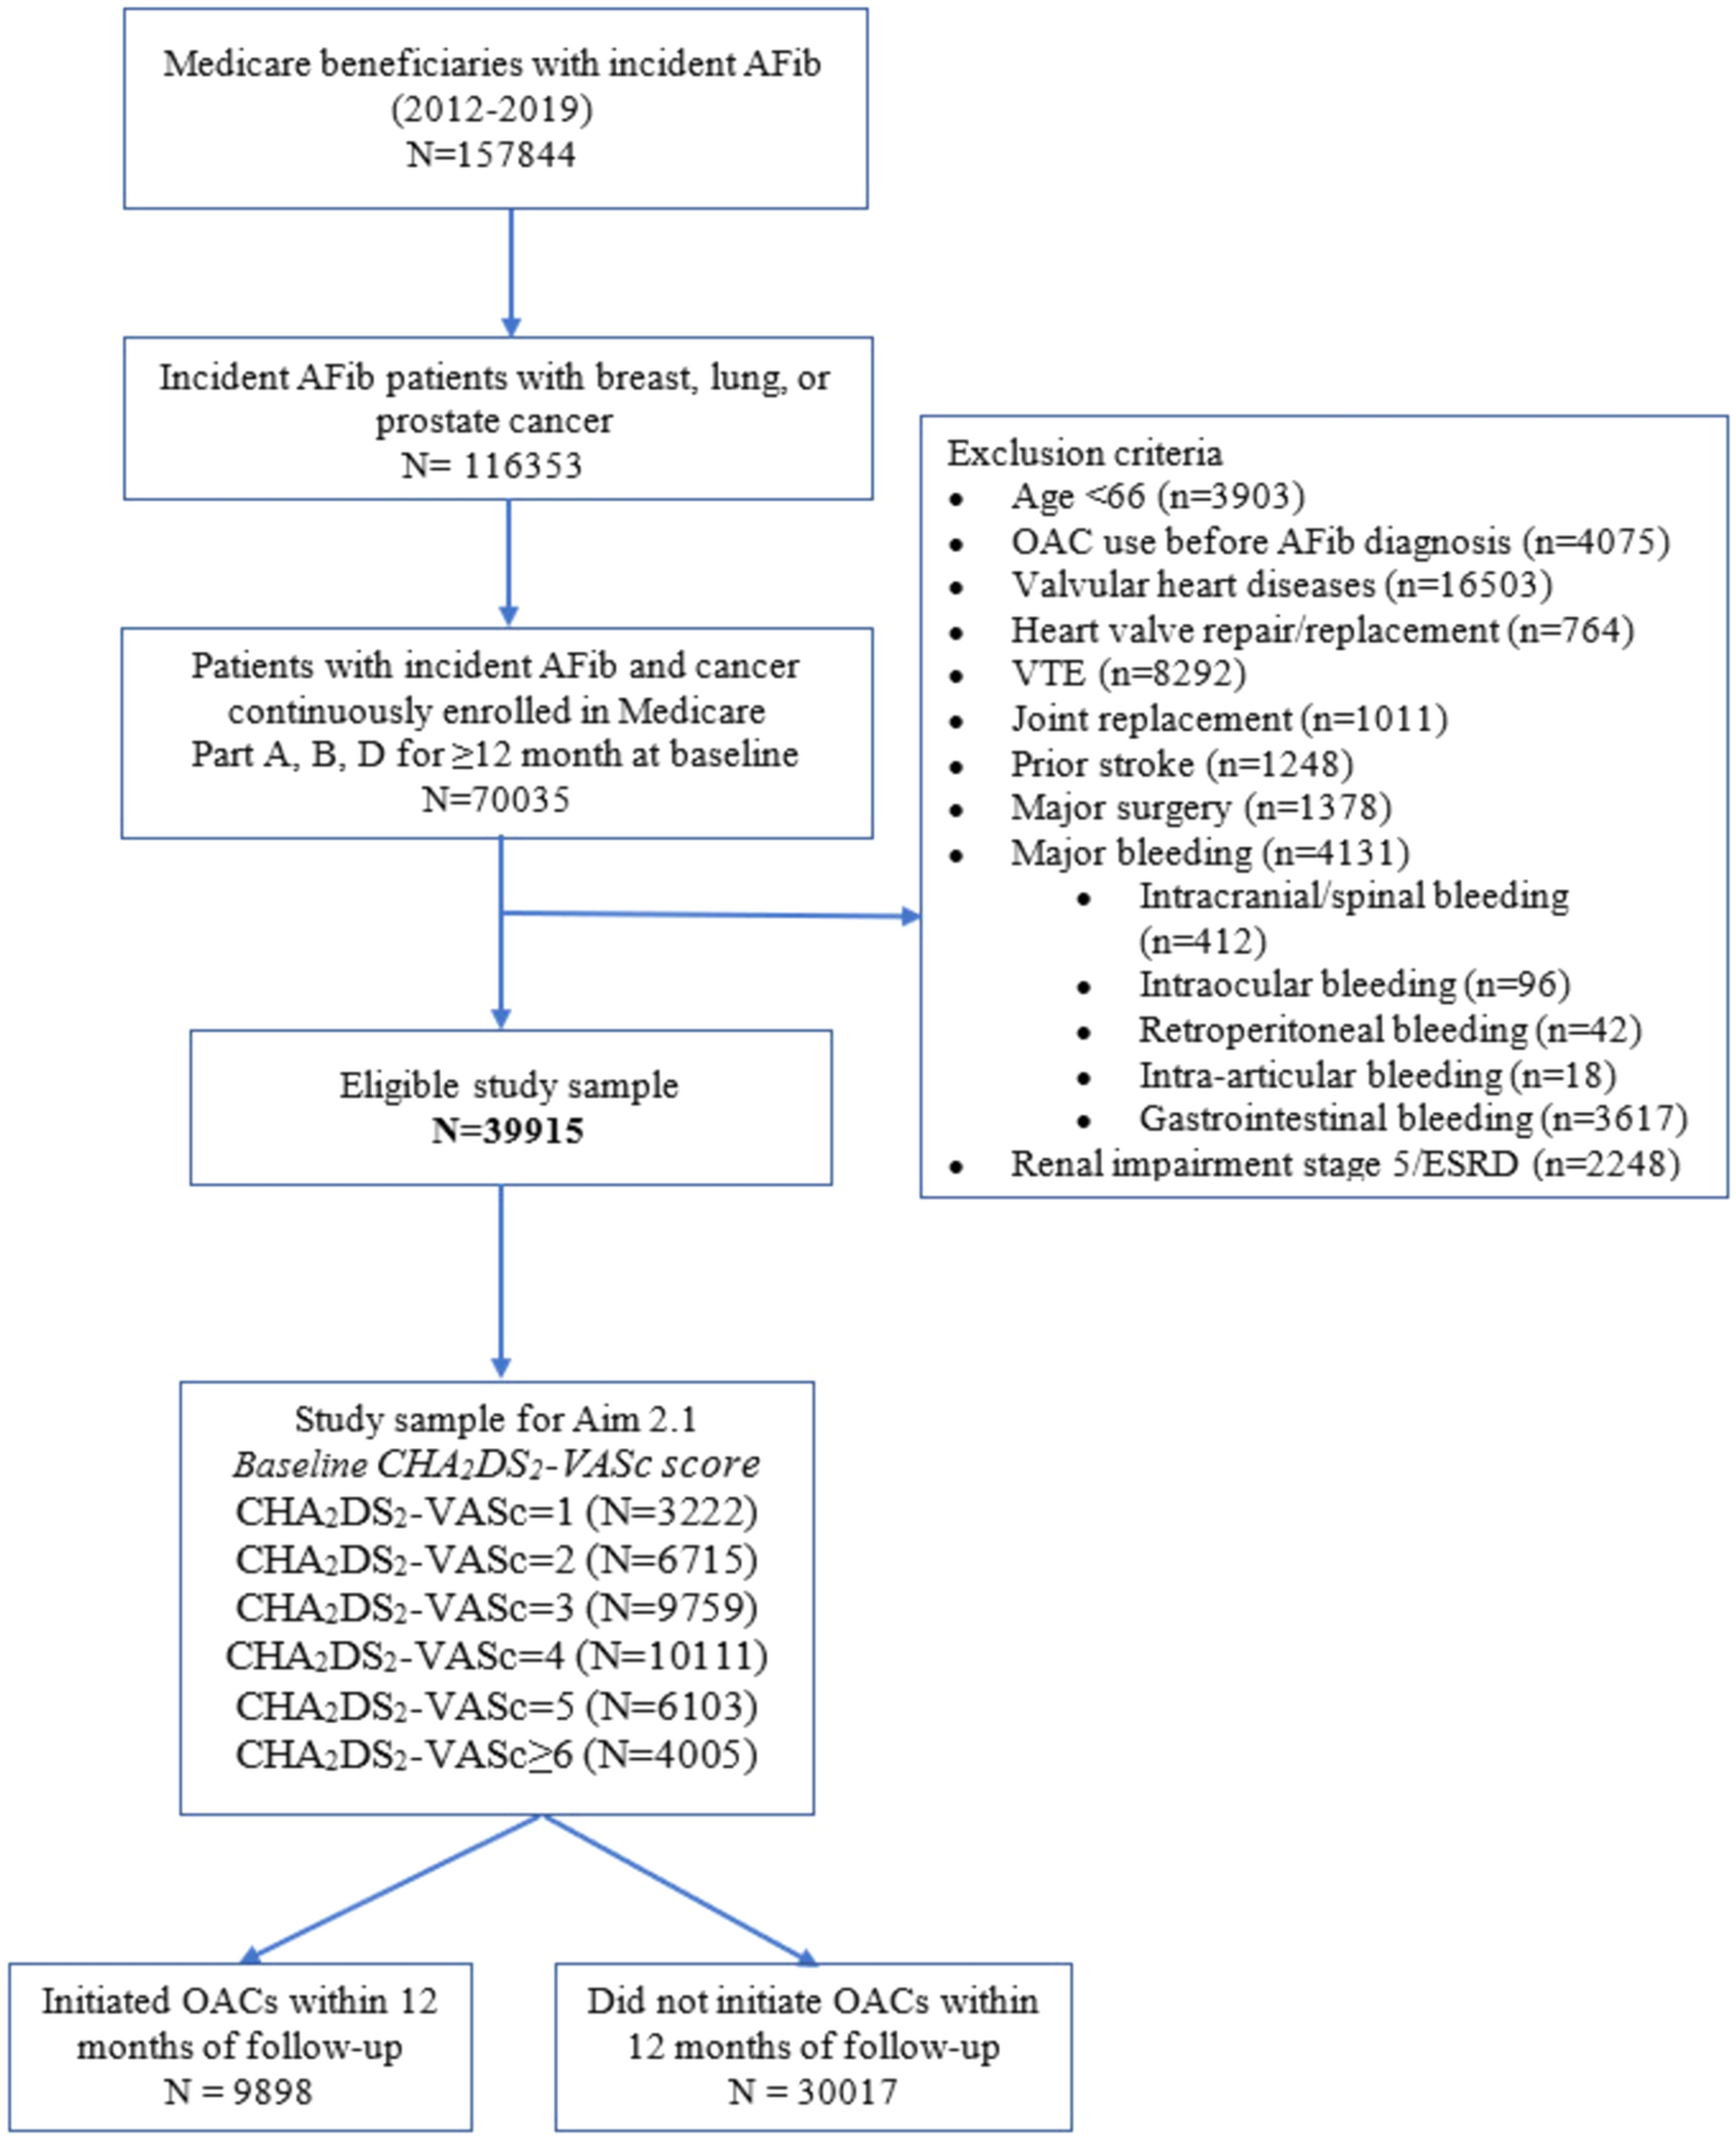 Benefit and risk of oral anticoagulant initiation strategies in patients with atrial fibrillation and cancer: a target trial emulation using the SEER-Medicare database